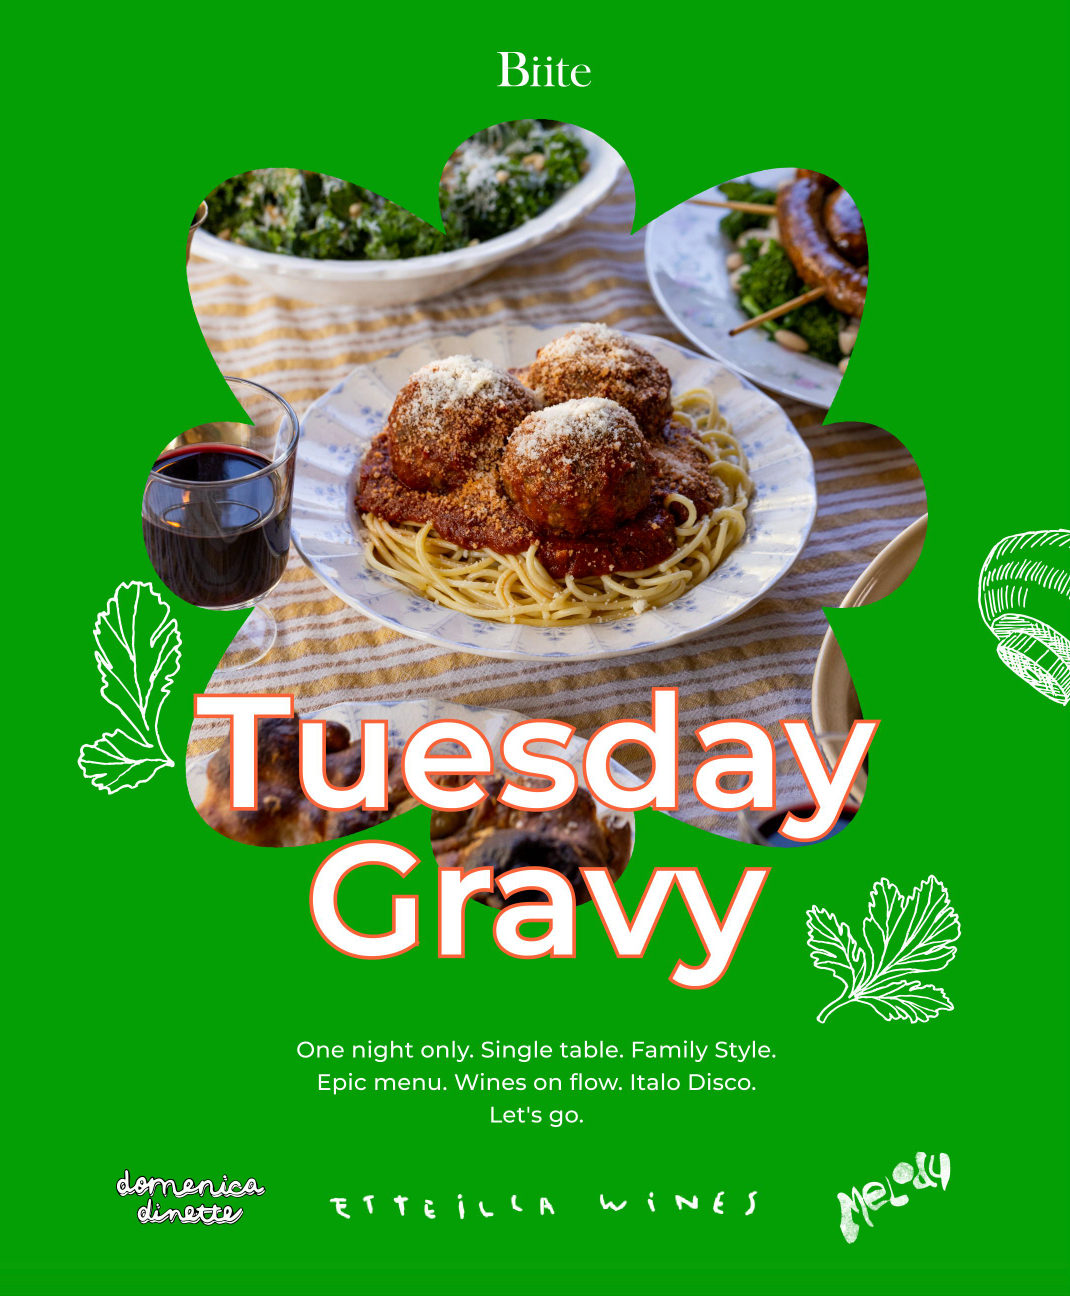 TUESDAY GRAVY, a Big Italian Feast by Domenica Dinette X Etteilla Wines at Melody